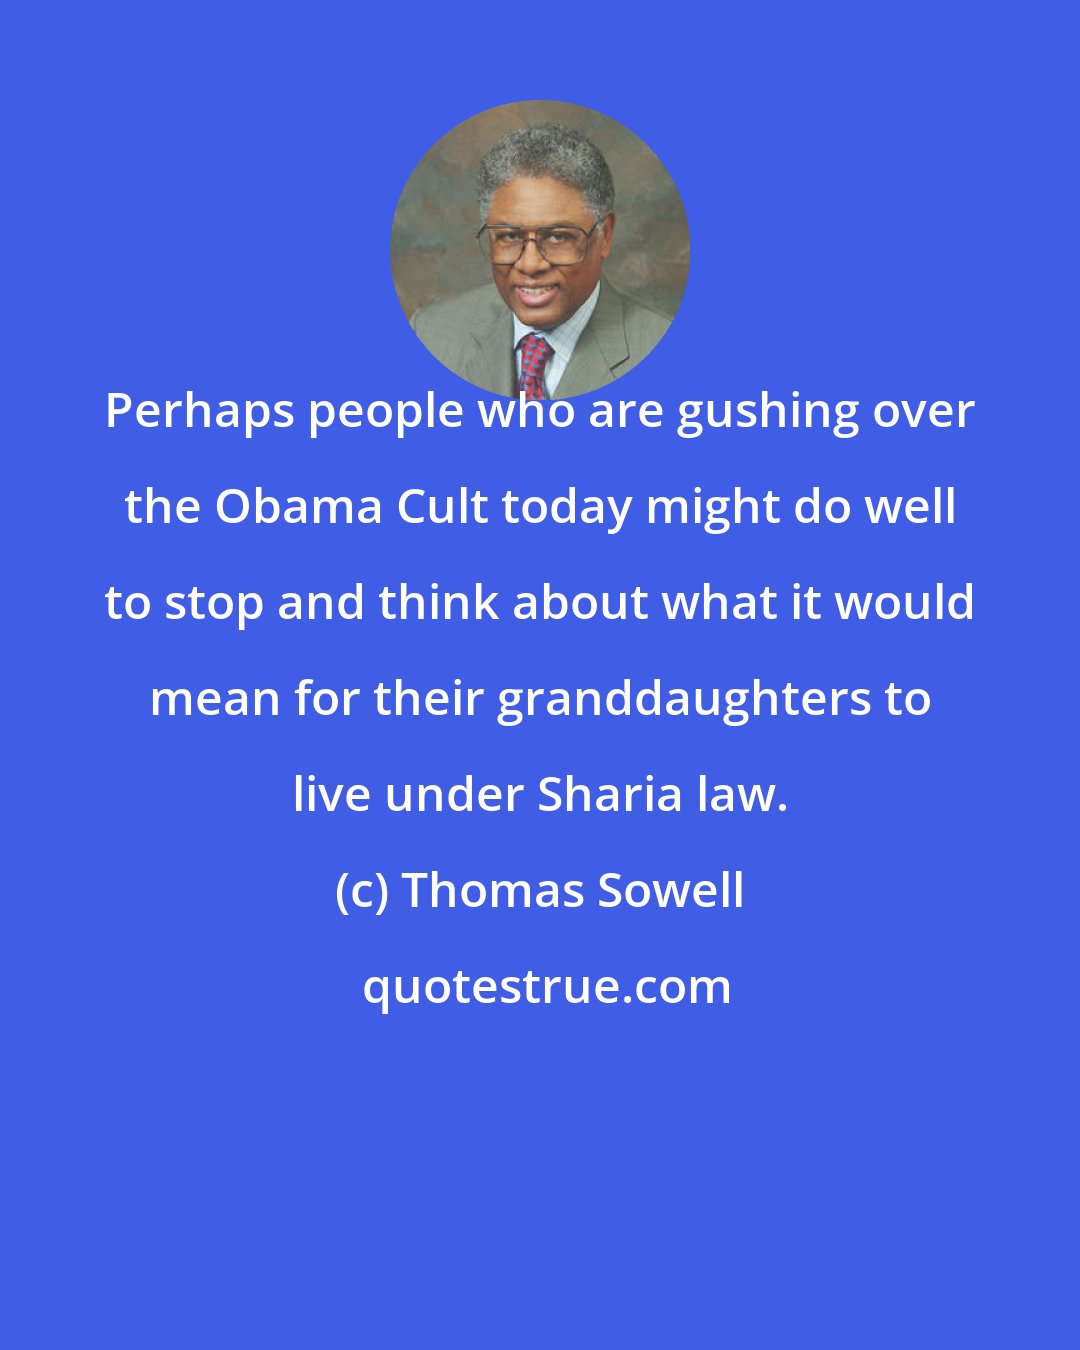 Thomas Sowell: Perhaps people who are gushing over the Obama Cult today might do well to stop and think about what it would mean for their granddaughters to live under Sharia law.